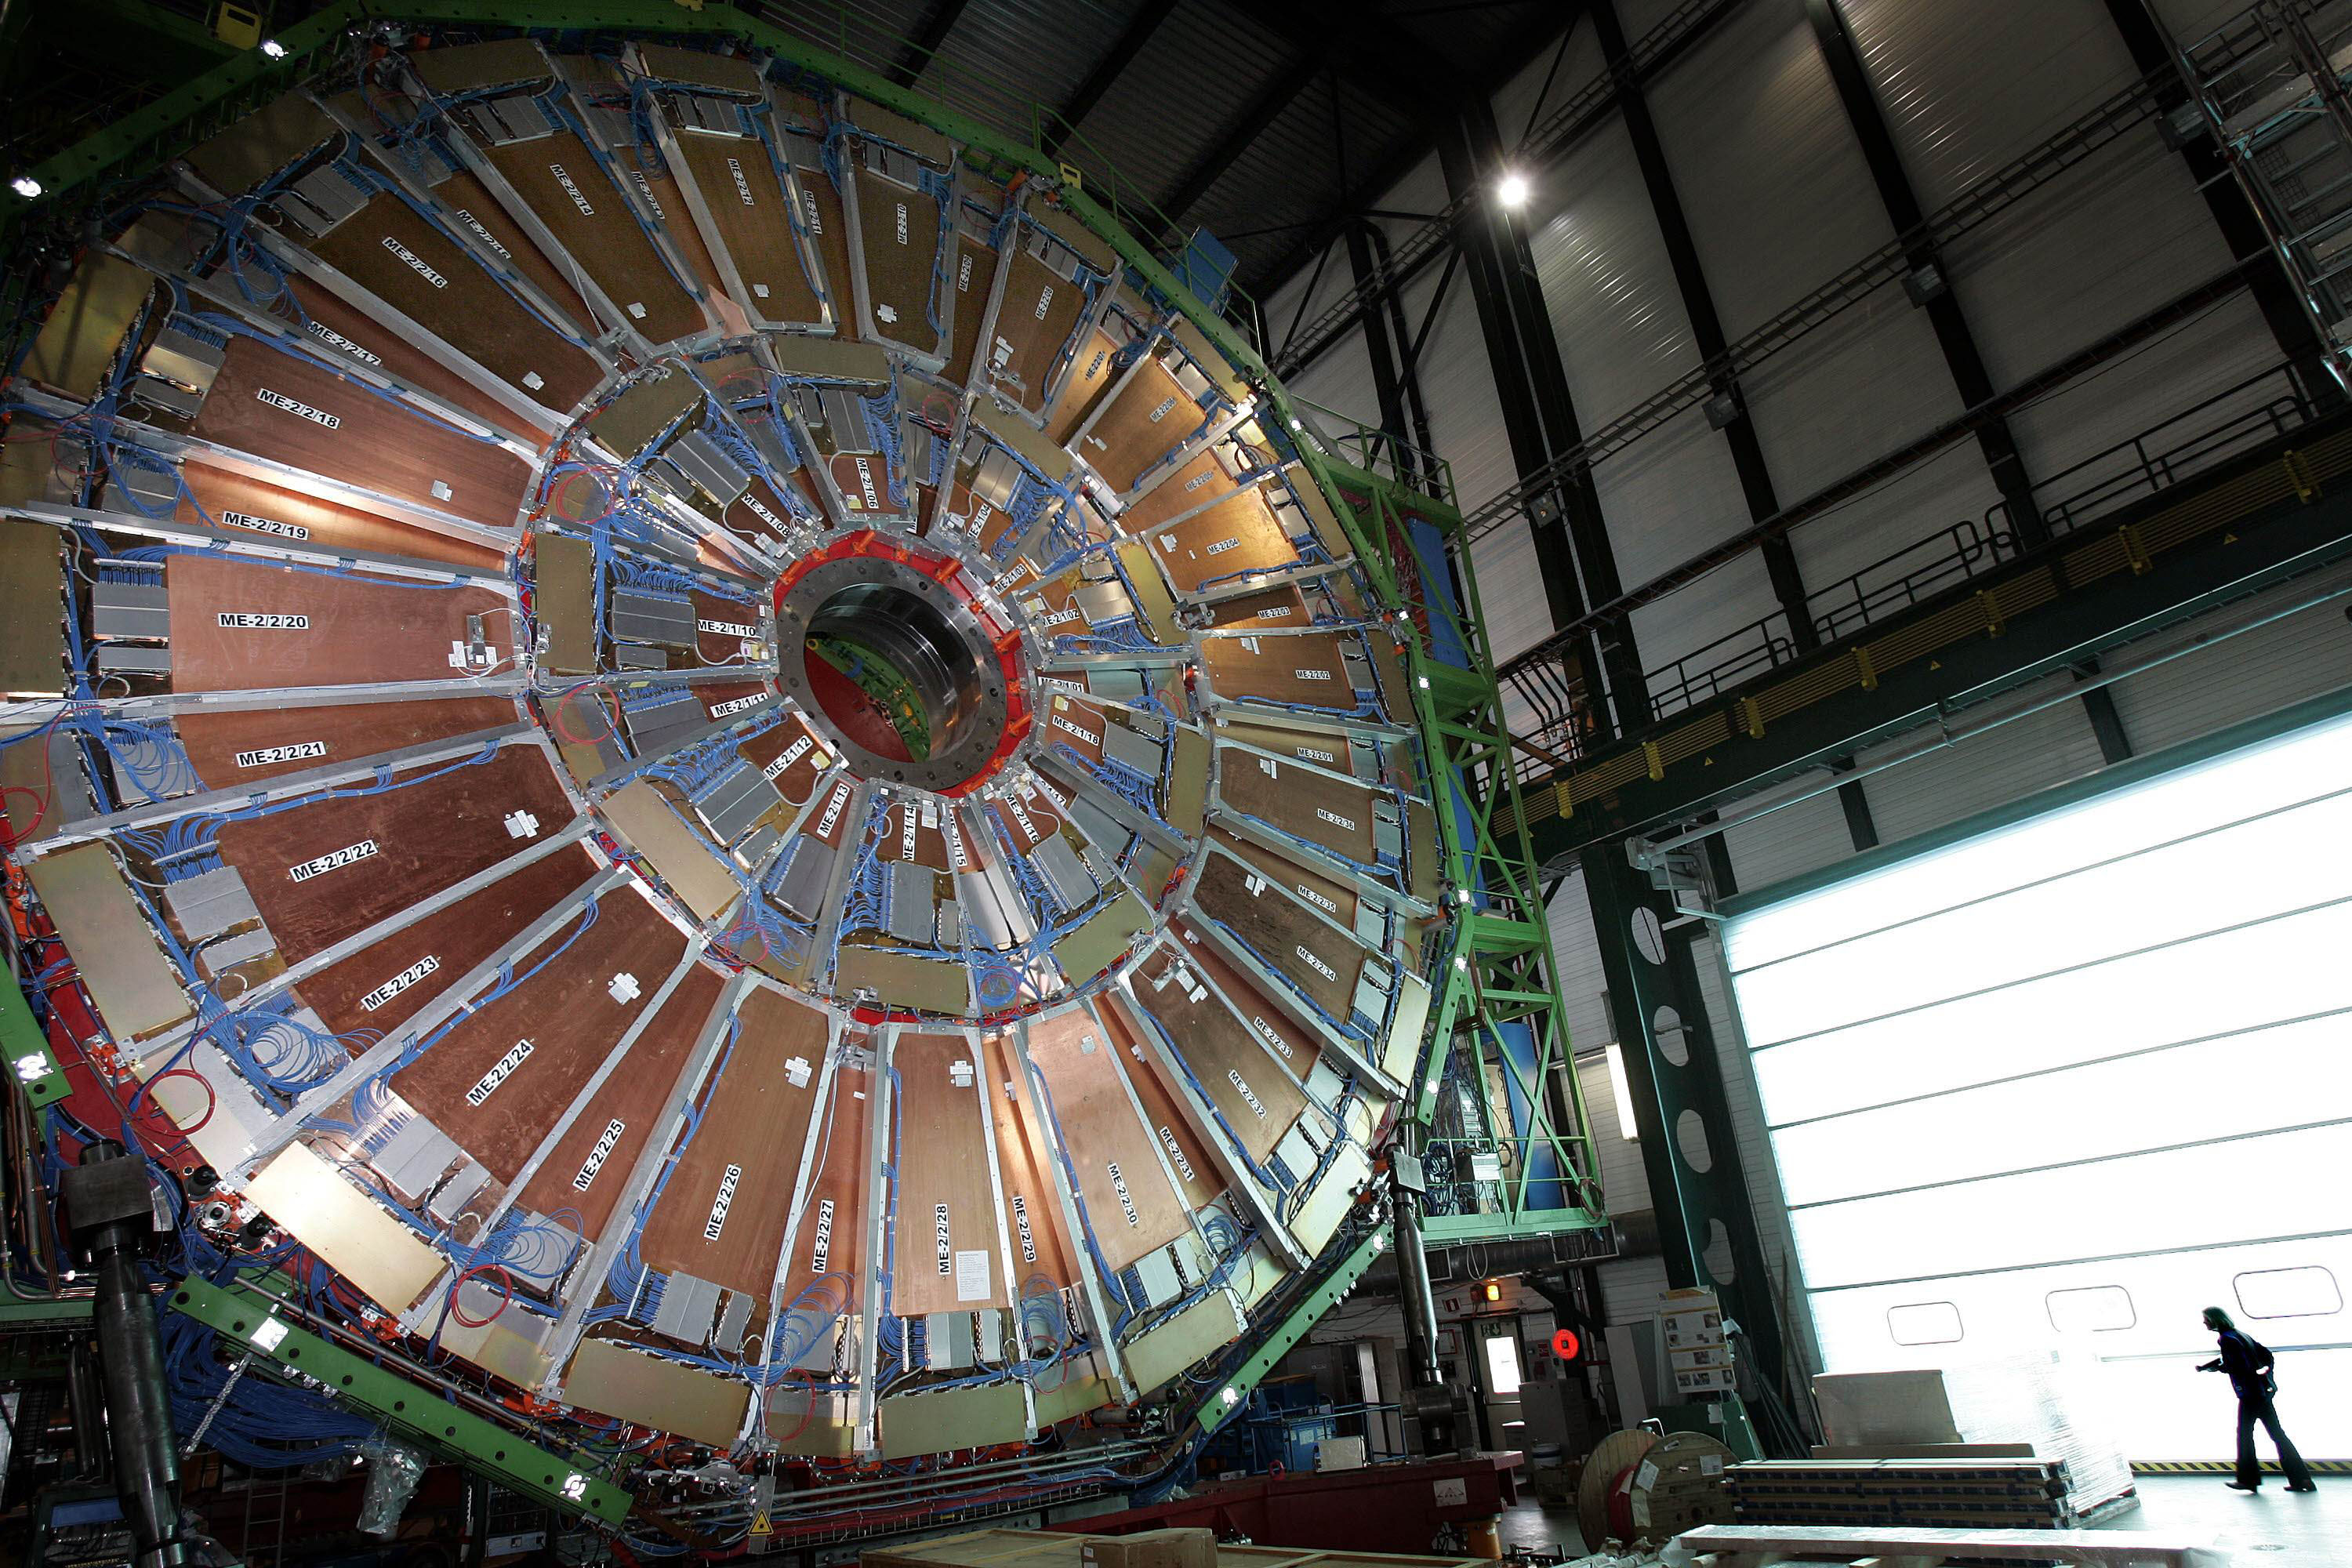 Pure science: The research into quantum mechanics using the Large Hadron Collider particle accelerator at European Organization for Nuclear Research (CERN) may ultimately lead to advances in super-computing. | AFP-JIJI